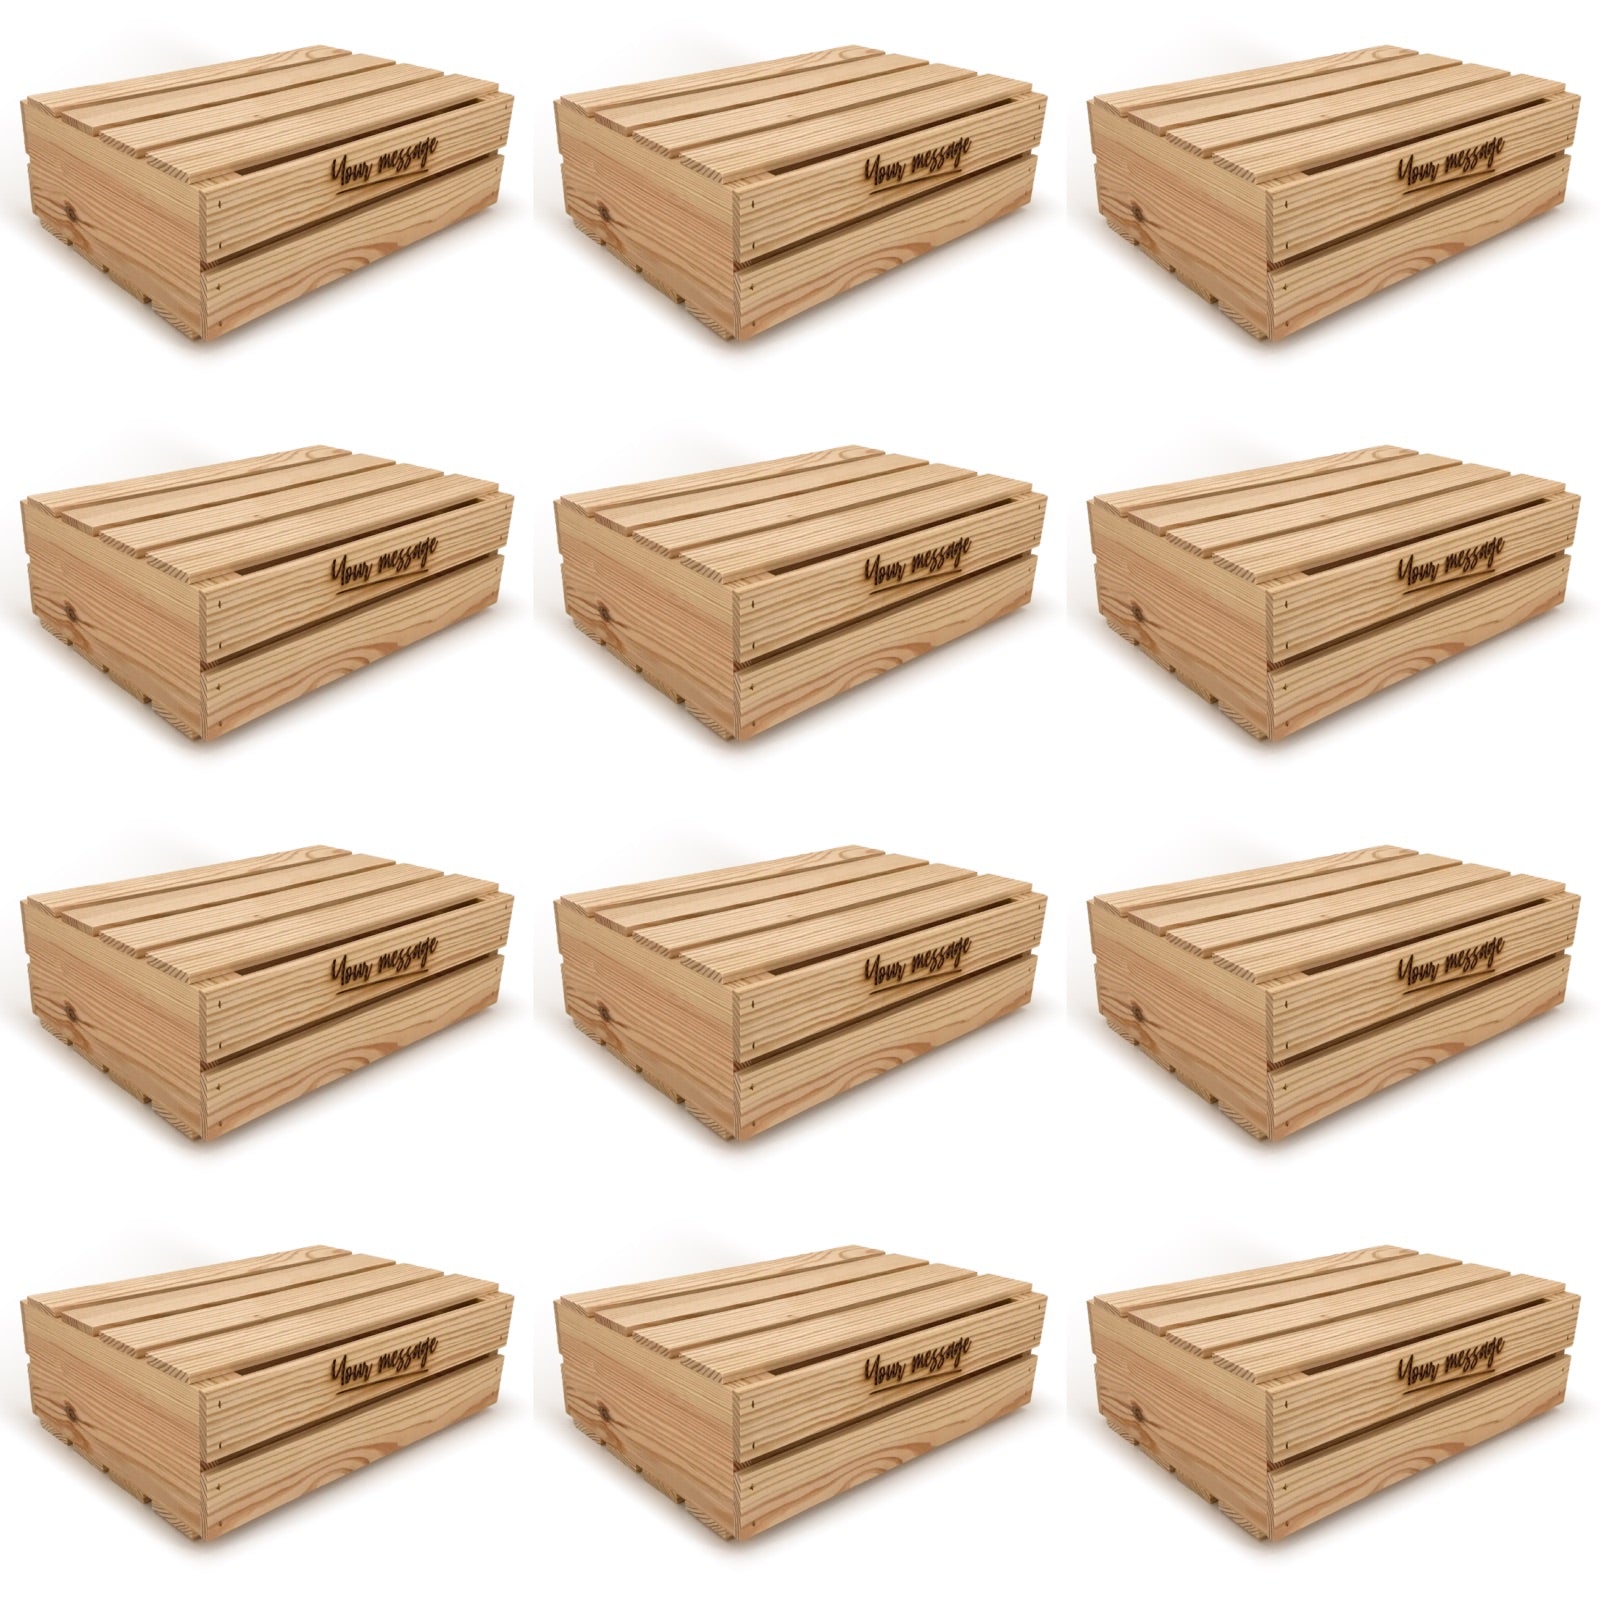 12 Small wooden crates with lid and custom message 16x12x5.25, 6-WS-16-12-5.25-ST-NW-LL, 12-WS-16-12-5.25-ST-NW-LL, 24-WS-16-12-5.25-ST-NW-LL, 48-WS-16-12-5.25-ST-NW-LL, 96-WS-16-12-5.25-ST-NW-LL